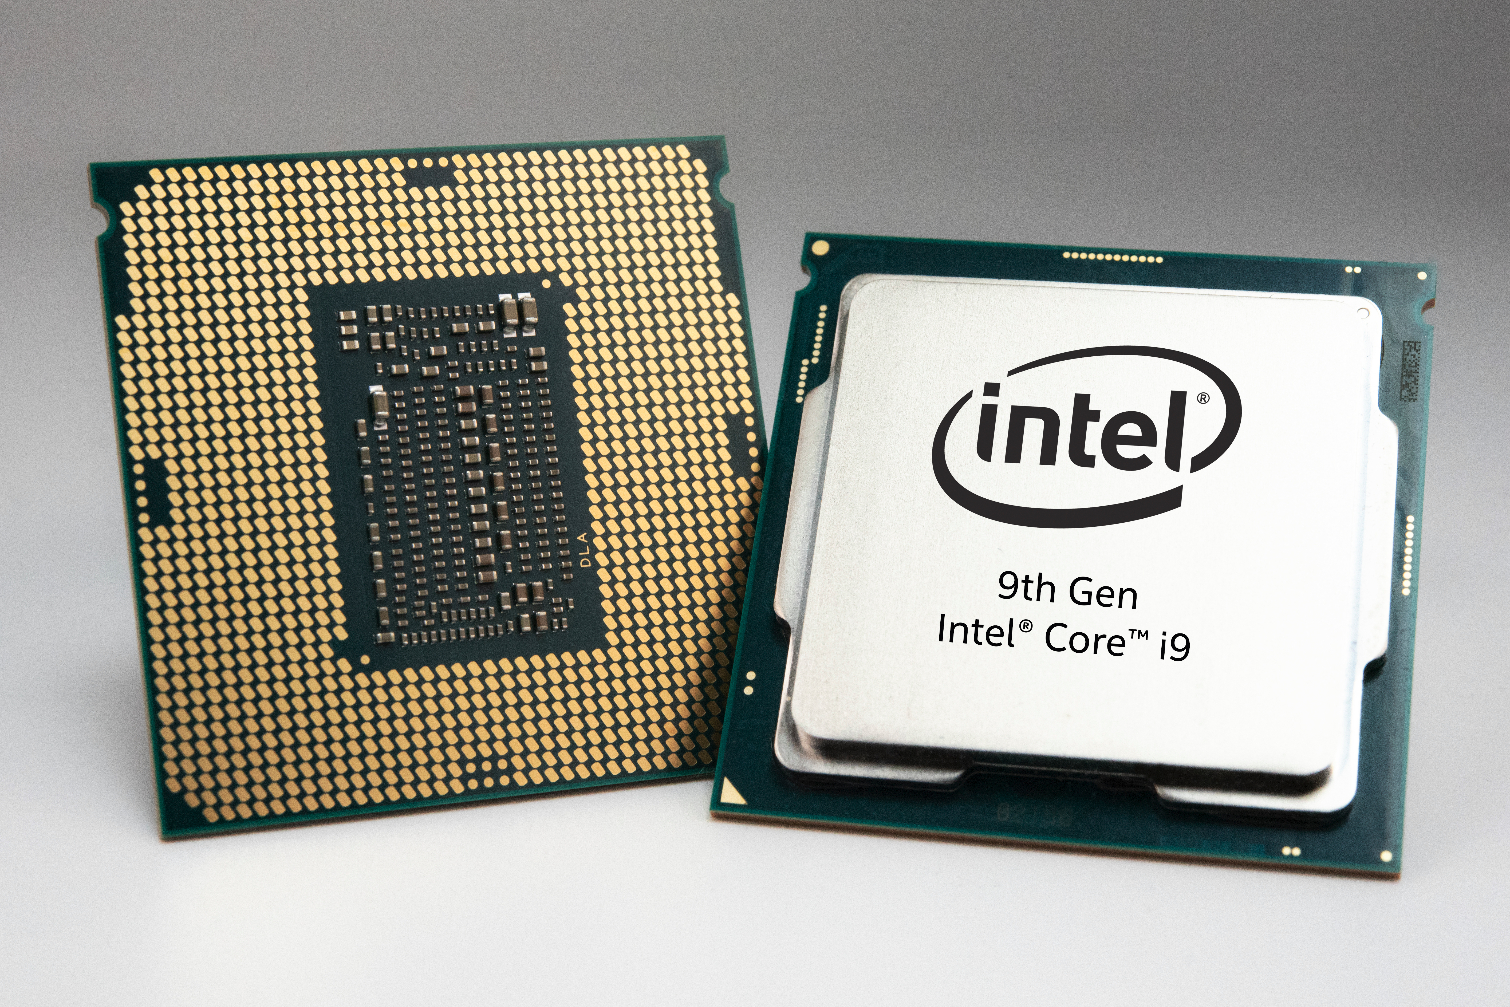 Intel Core i7-9700K 9th Gen CPU Review: Eight Cores And No Hyper